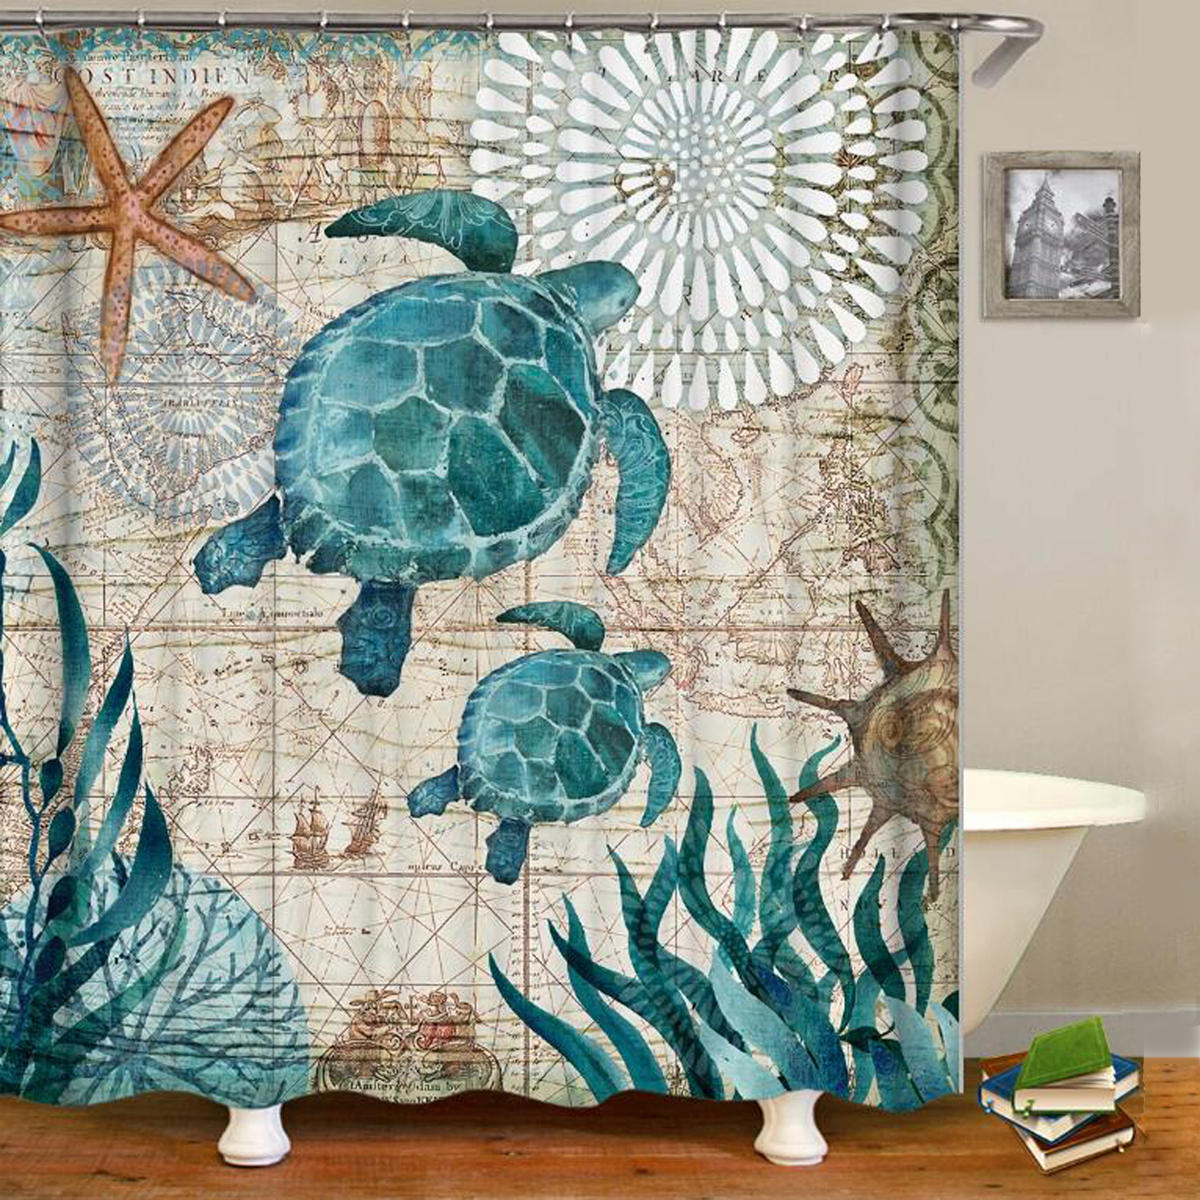 3D Bathroom Shower Curtain Polyester Waterproof Turtle Home With Hooks